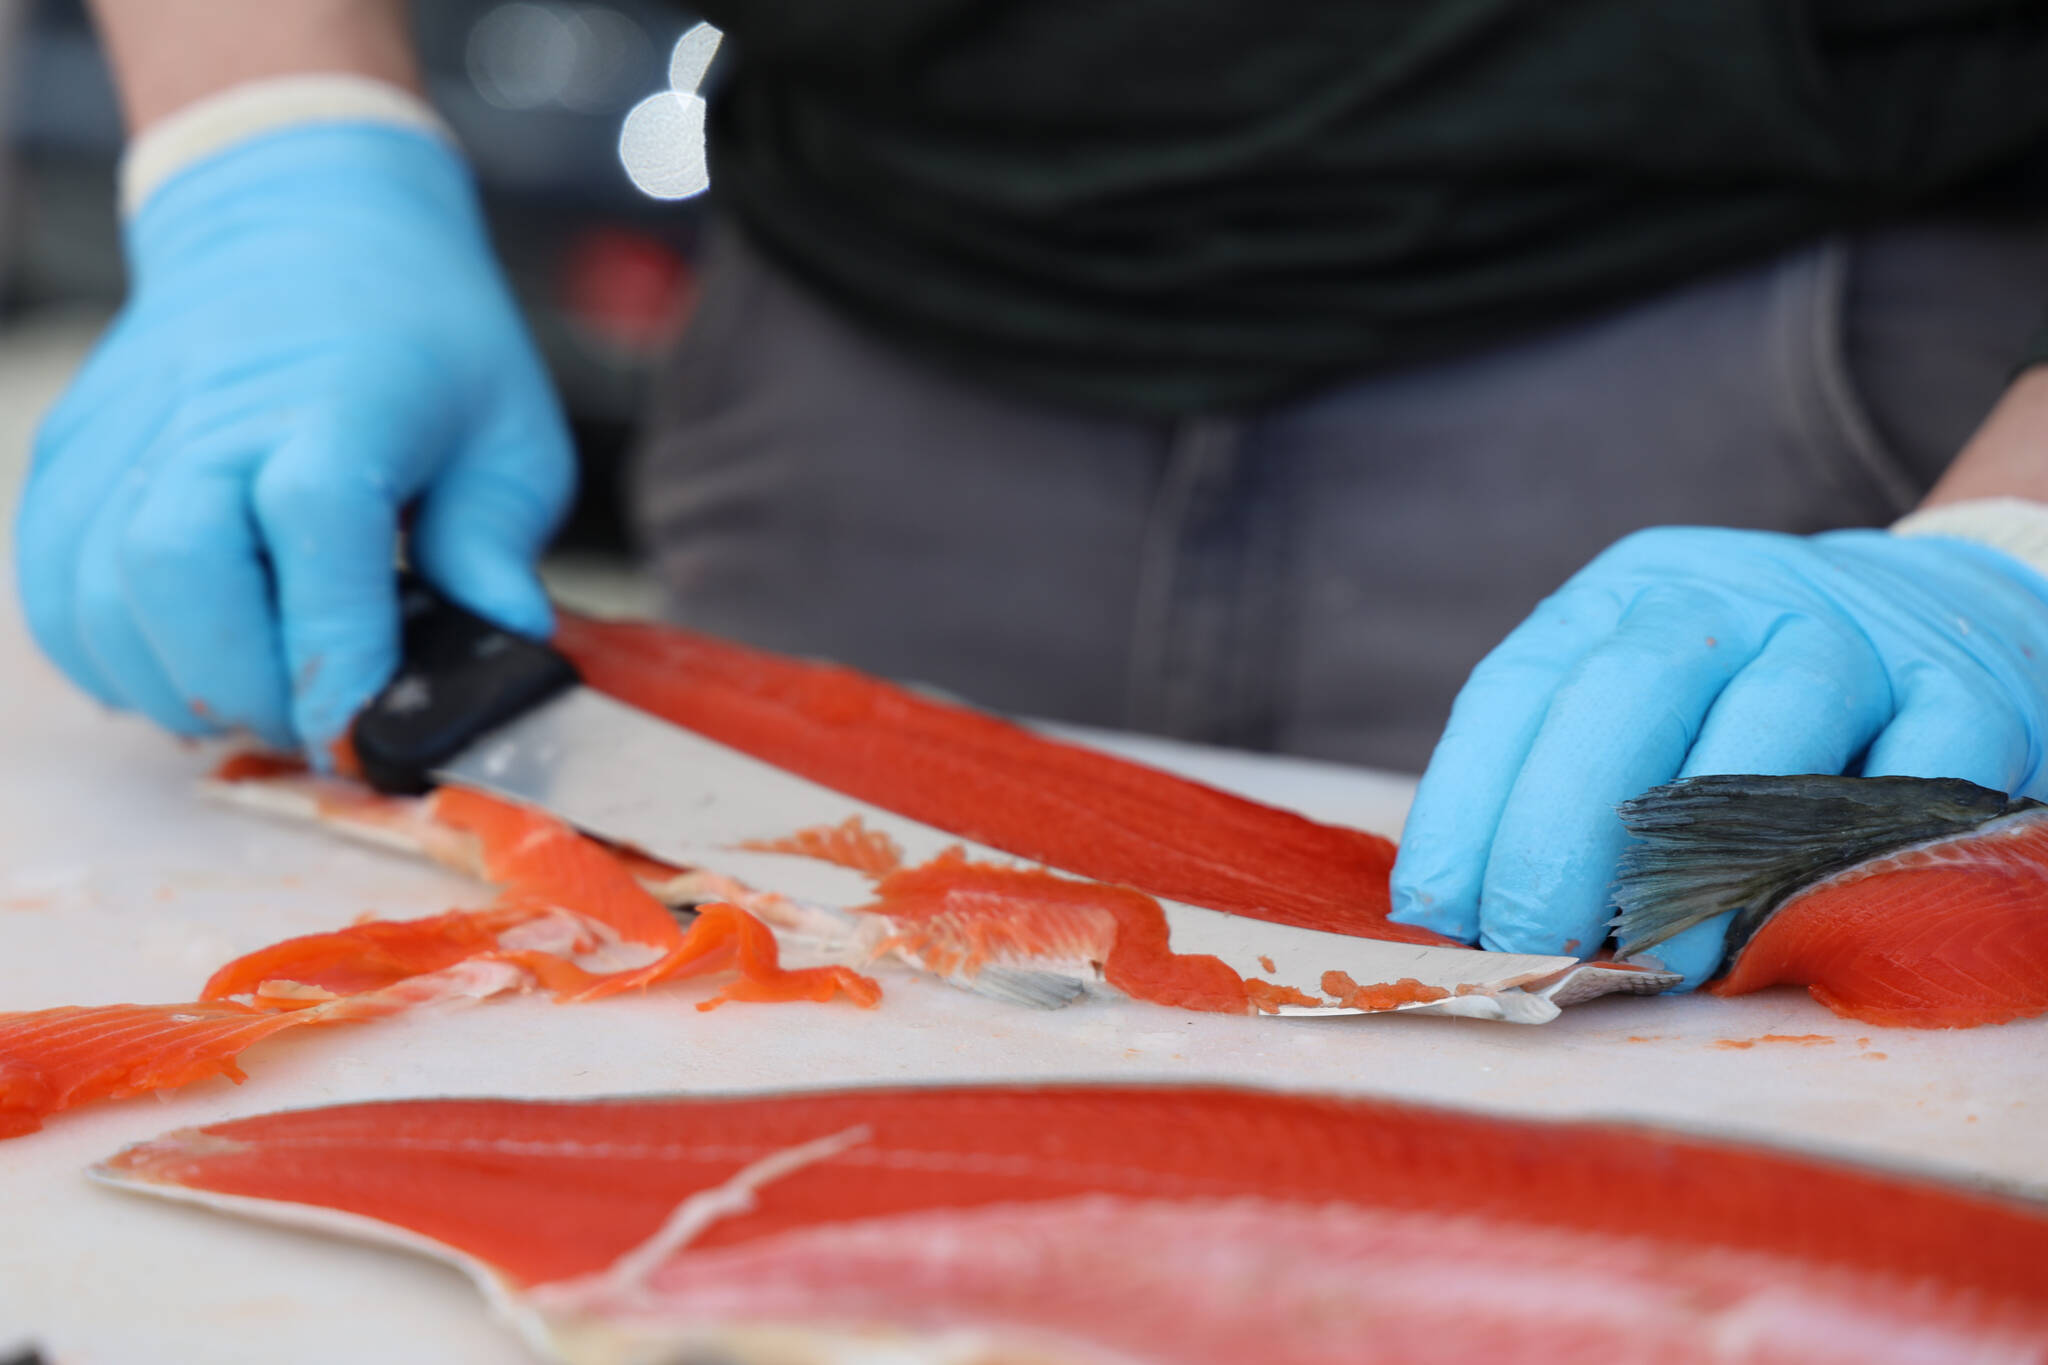 Jared Jerabek with Alaska Glacier Seafood fillets sockeye salmon to be cooked and handed out for free by Taku Smokeries during 2023 Juneau Maritime Festival Saturday afternoon at the Elizabeth Peratrovich Plaza. (Clarise Larson / Juneau Empire)